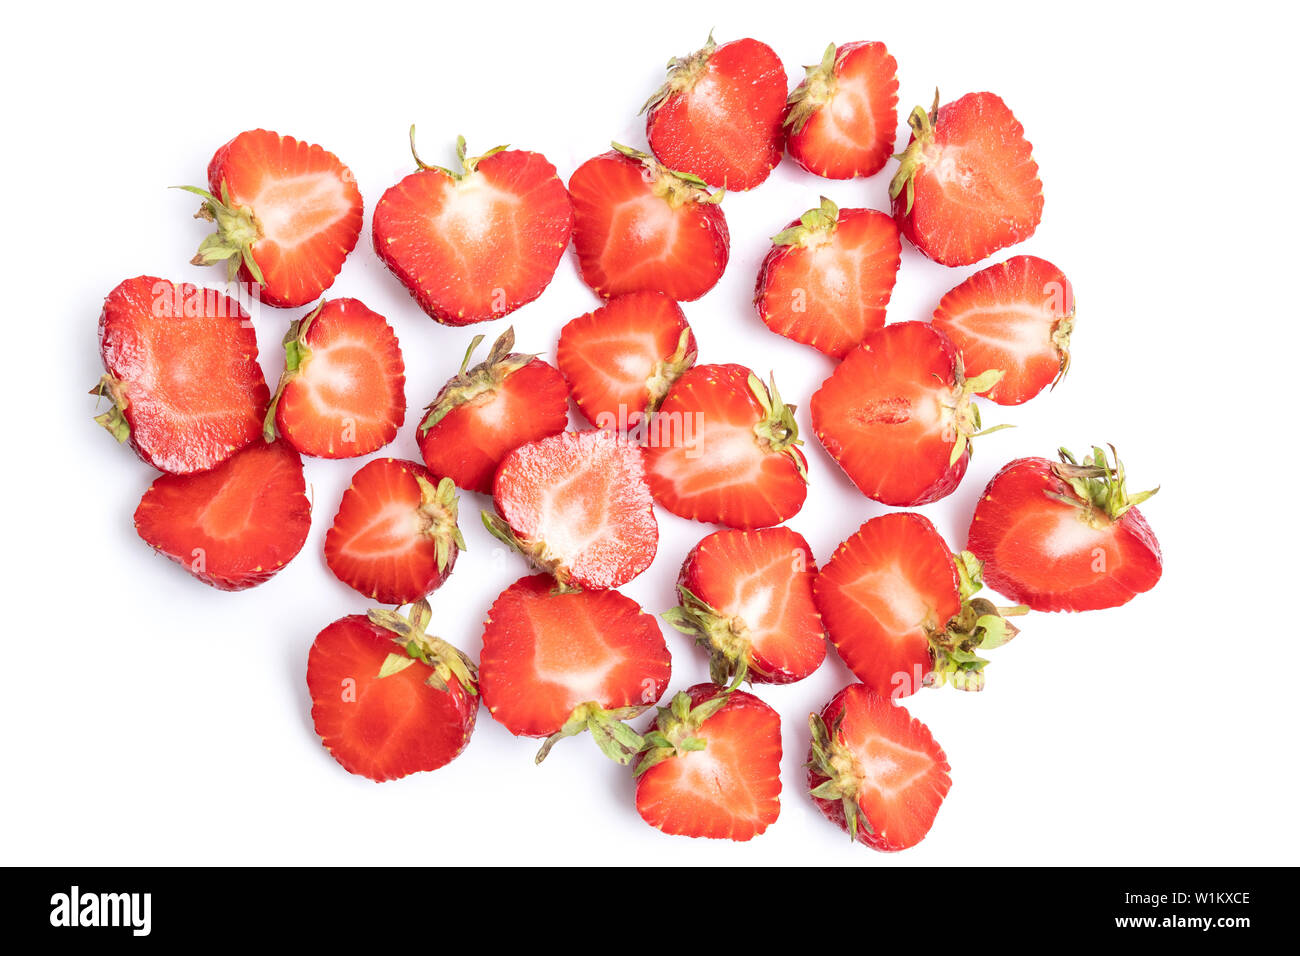 Description: Fresh red strawberries isolated on a white background Stock Photo